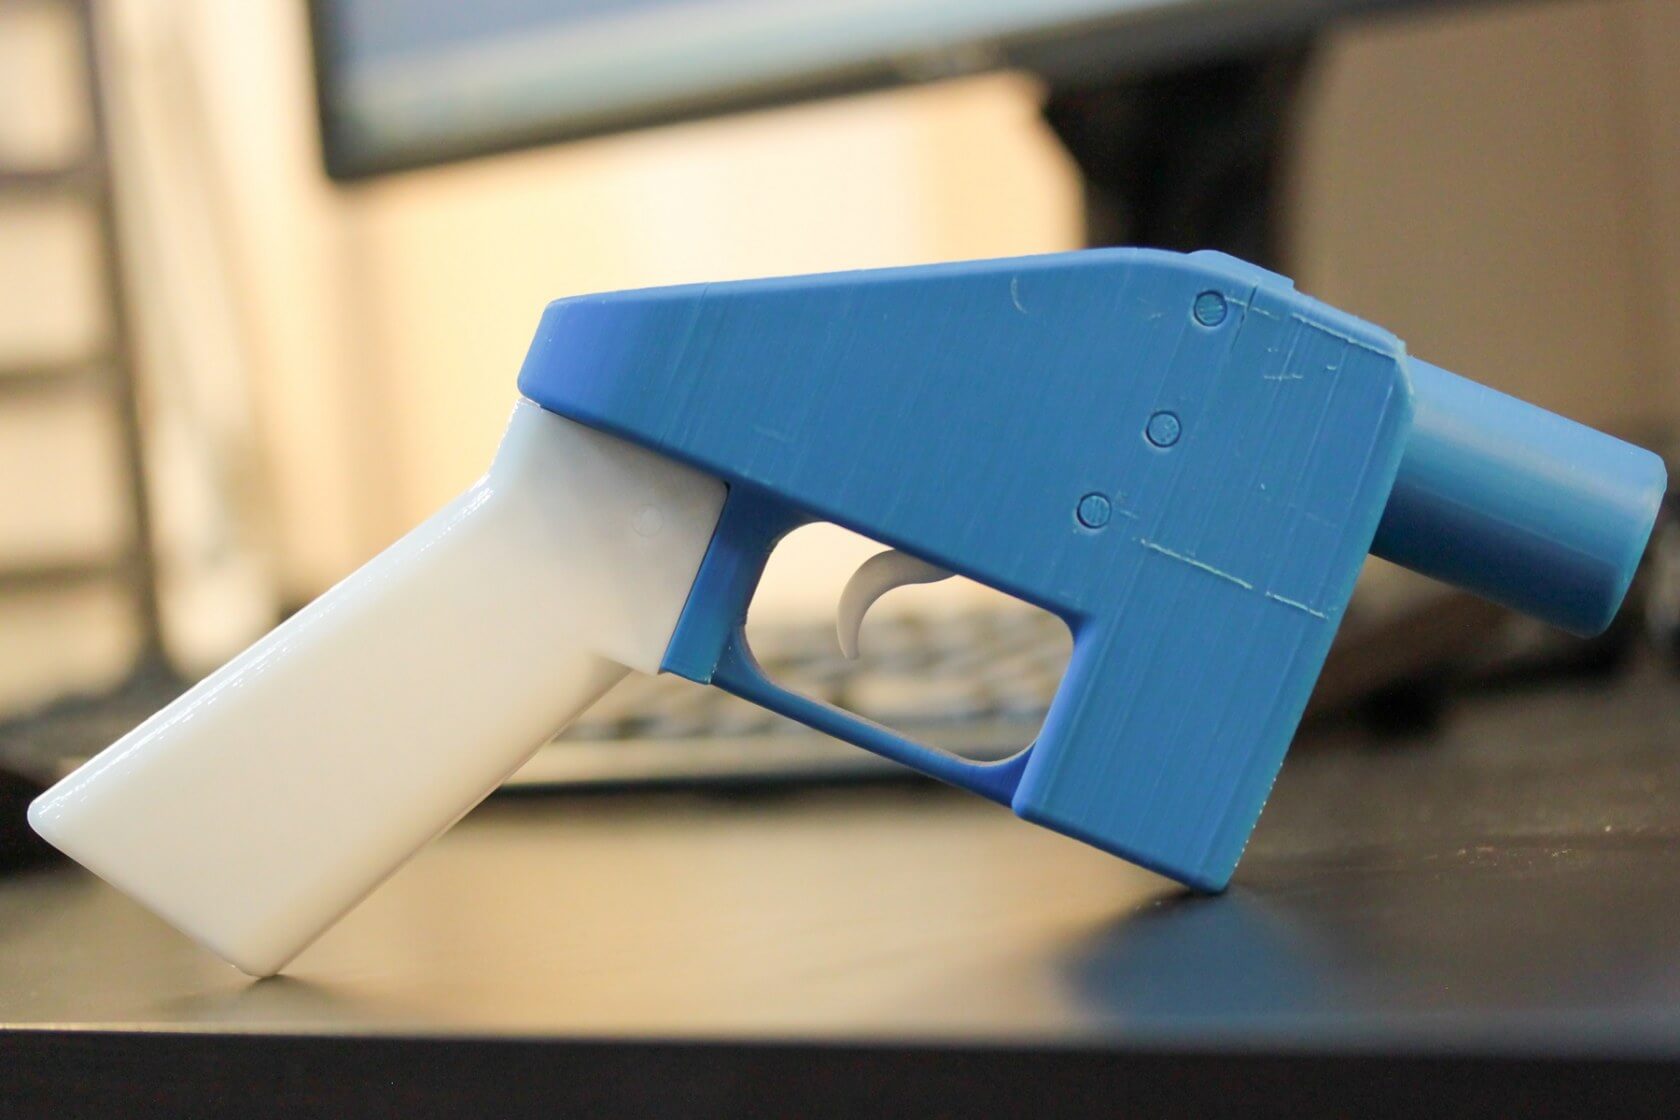 Blueprints for 3D-printed guns can now be owned and distributed legally